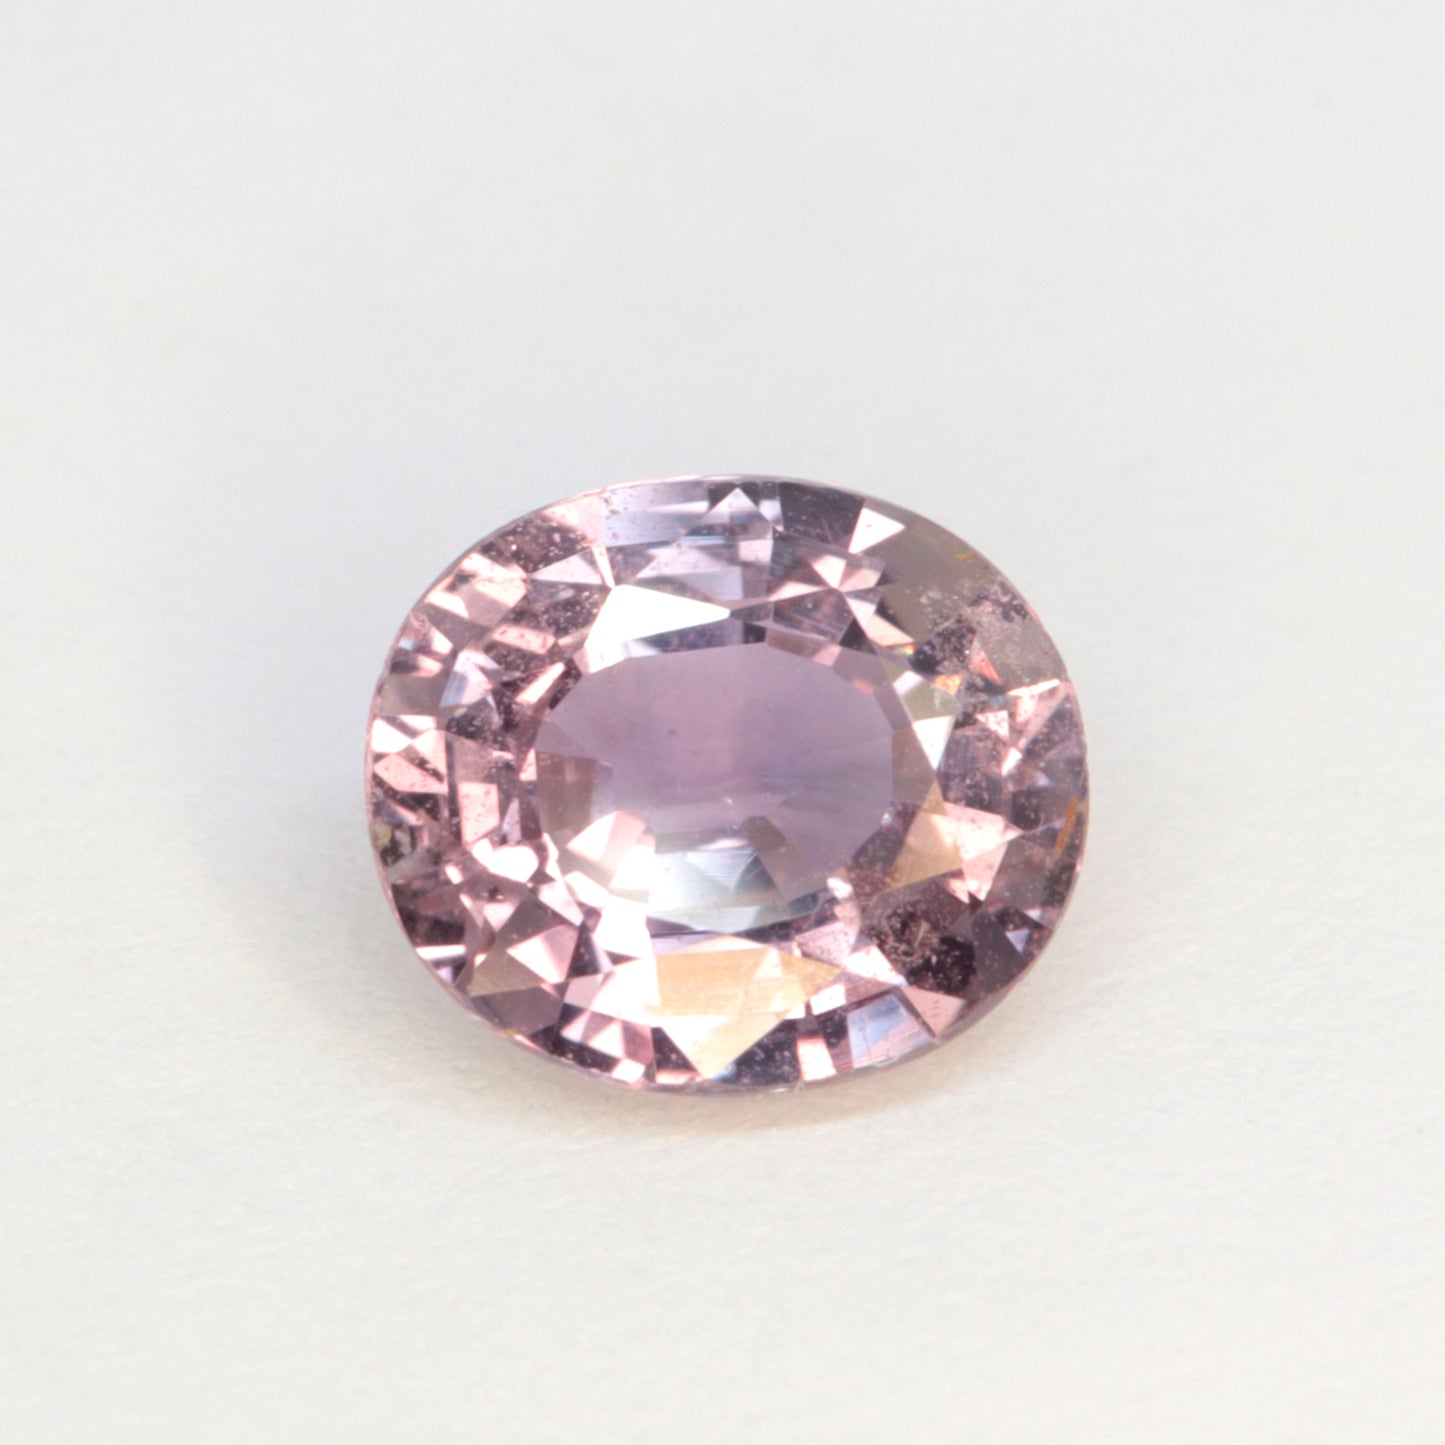 Certified Pink Sapphire 1.02ct